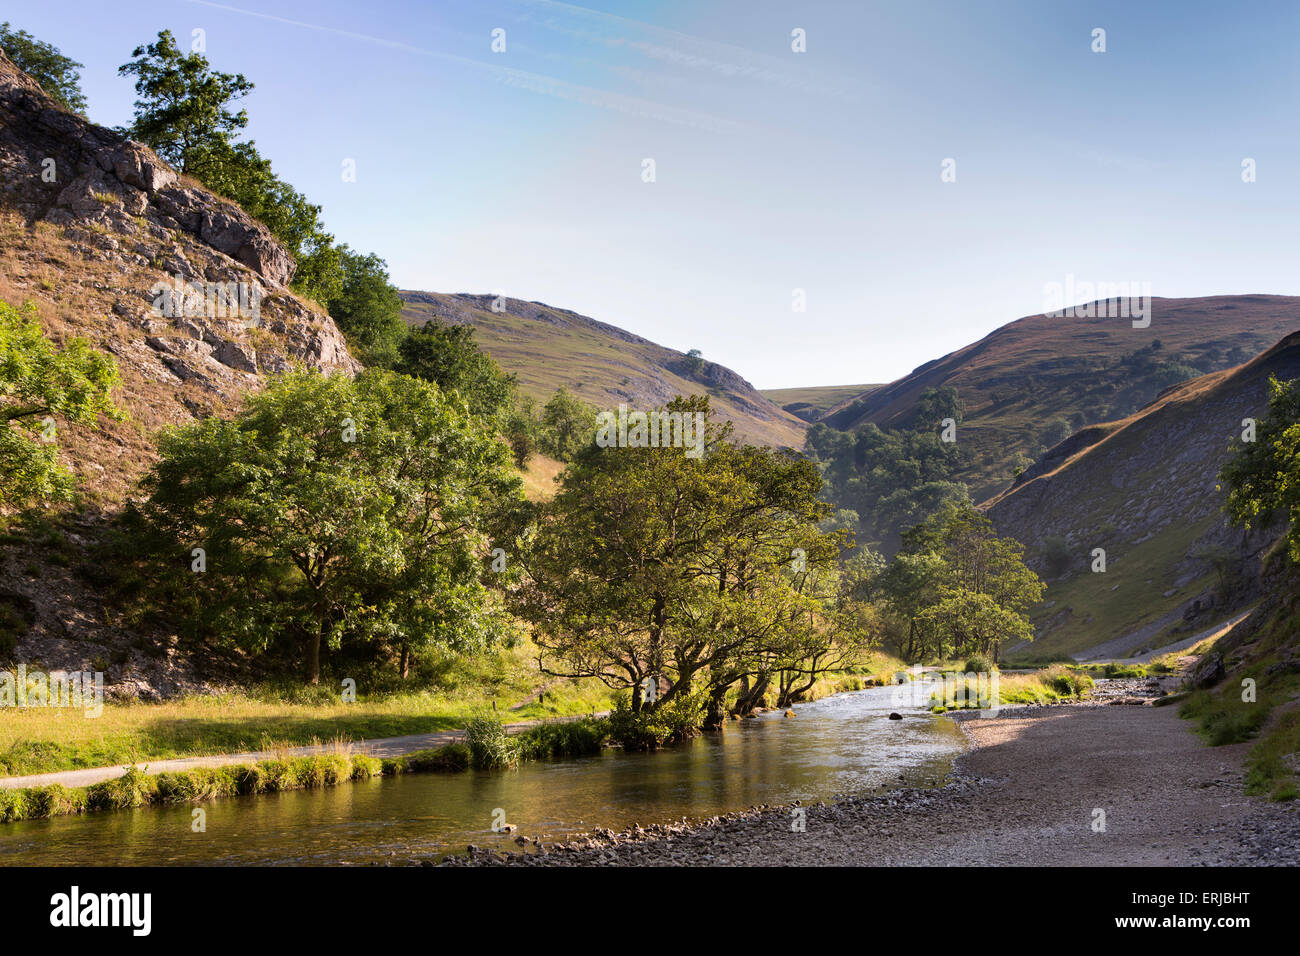 UK, England, Derbyshire, Dovedale, riverbank shingle footpath beside River Dove in summer Stock Photo